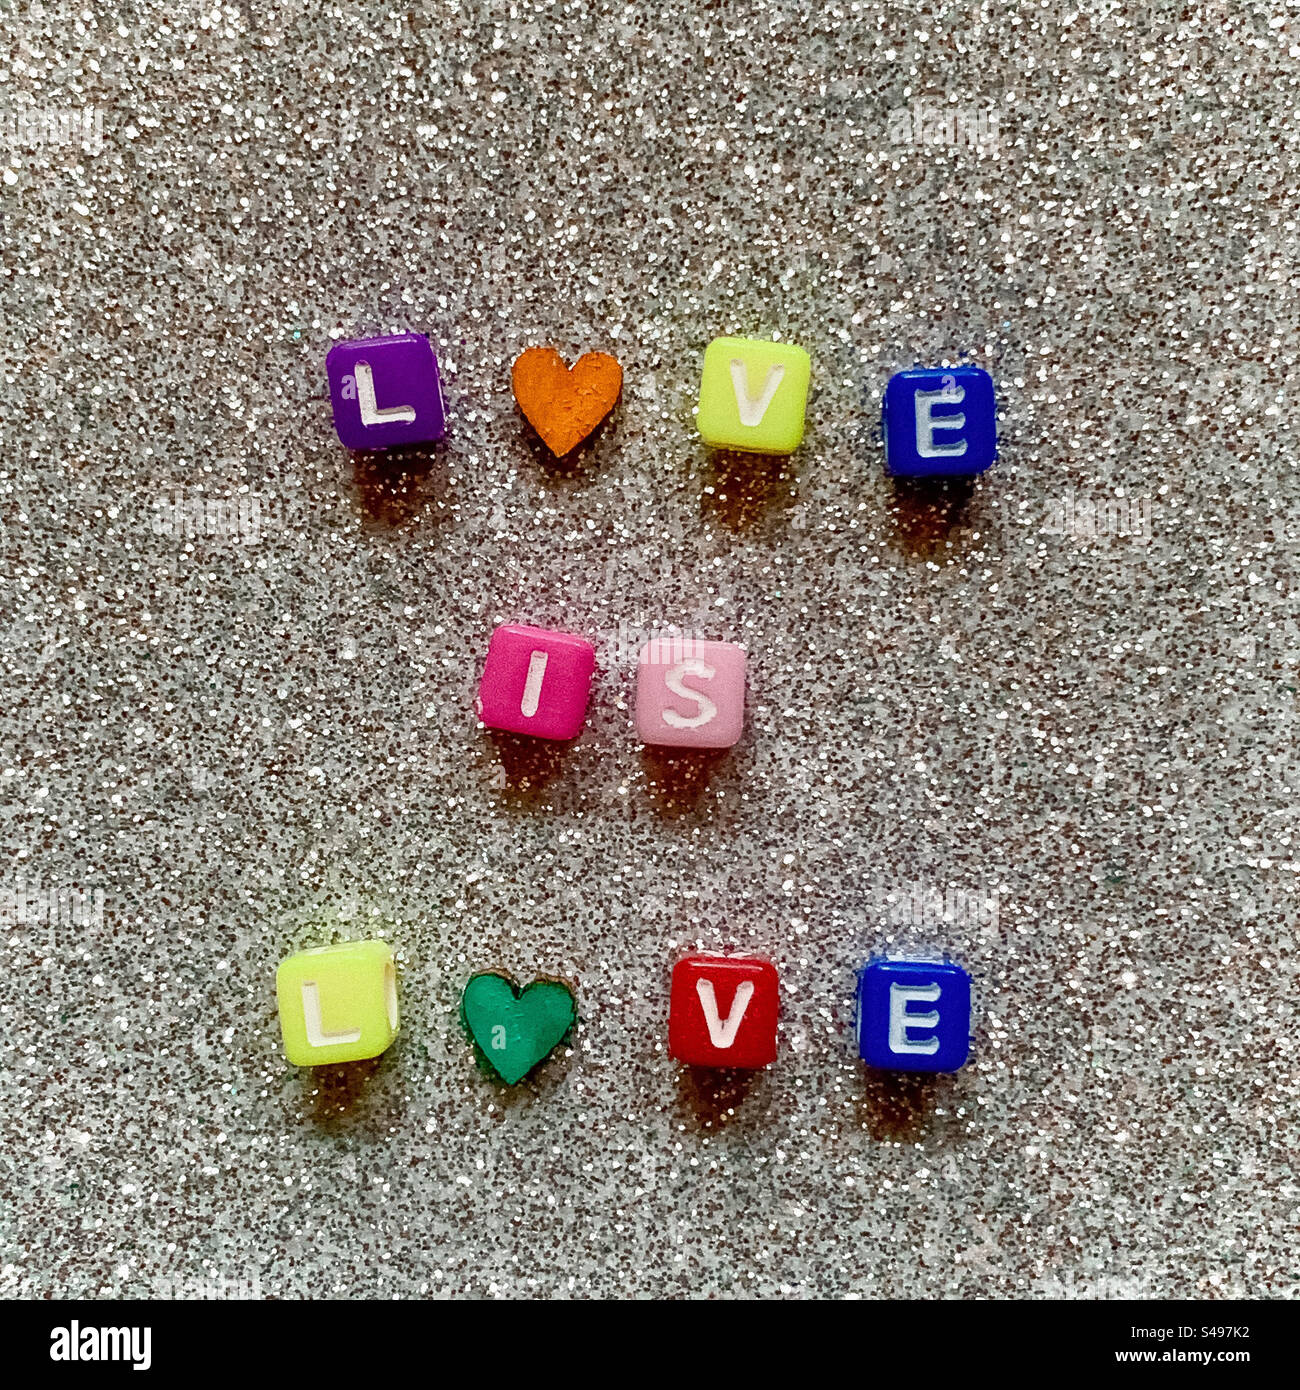 Love is Love spelled out with colourful letters on a glittery background Stock Photo